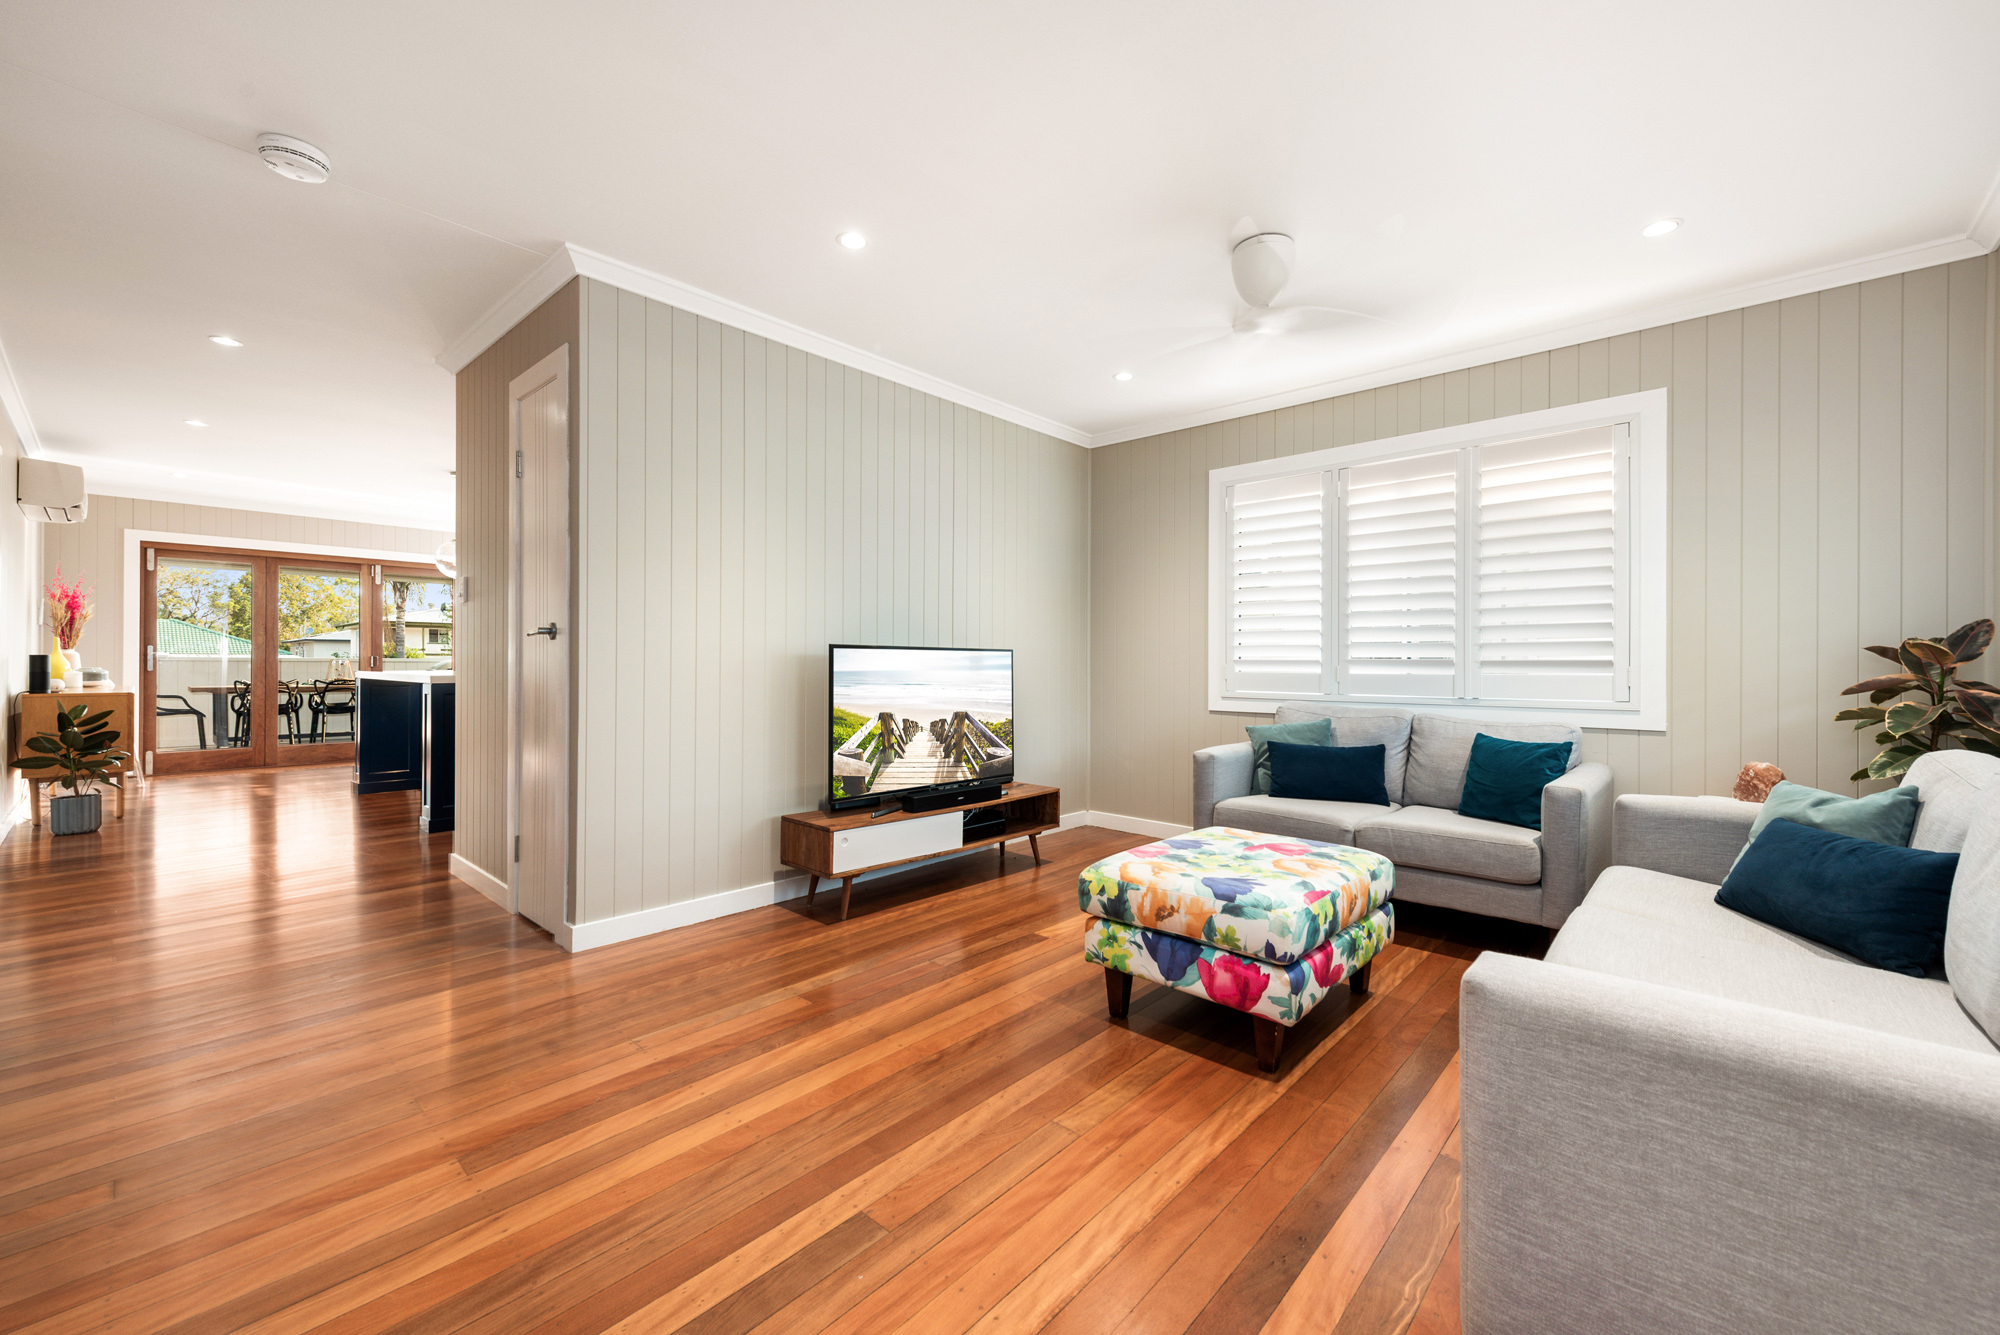 Living space for an extension in Oxley Brisbane